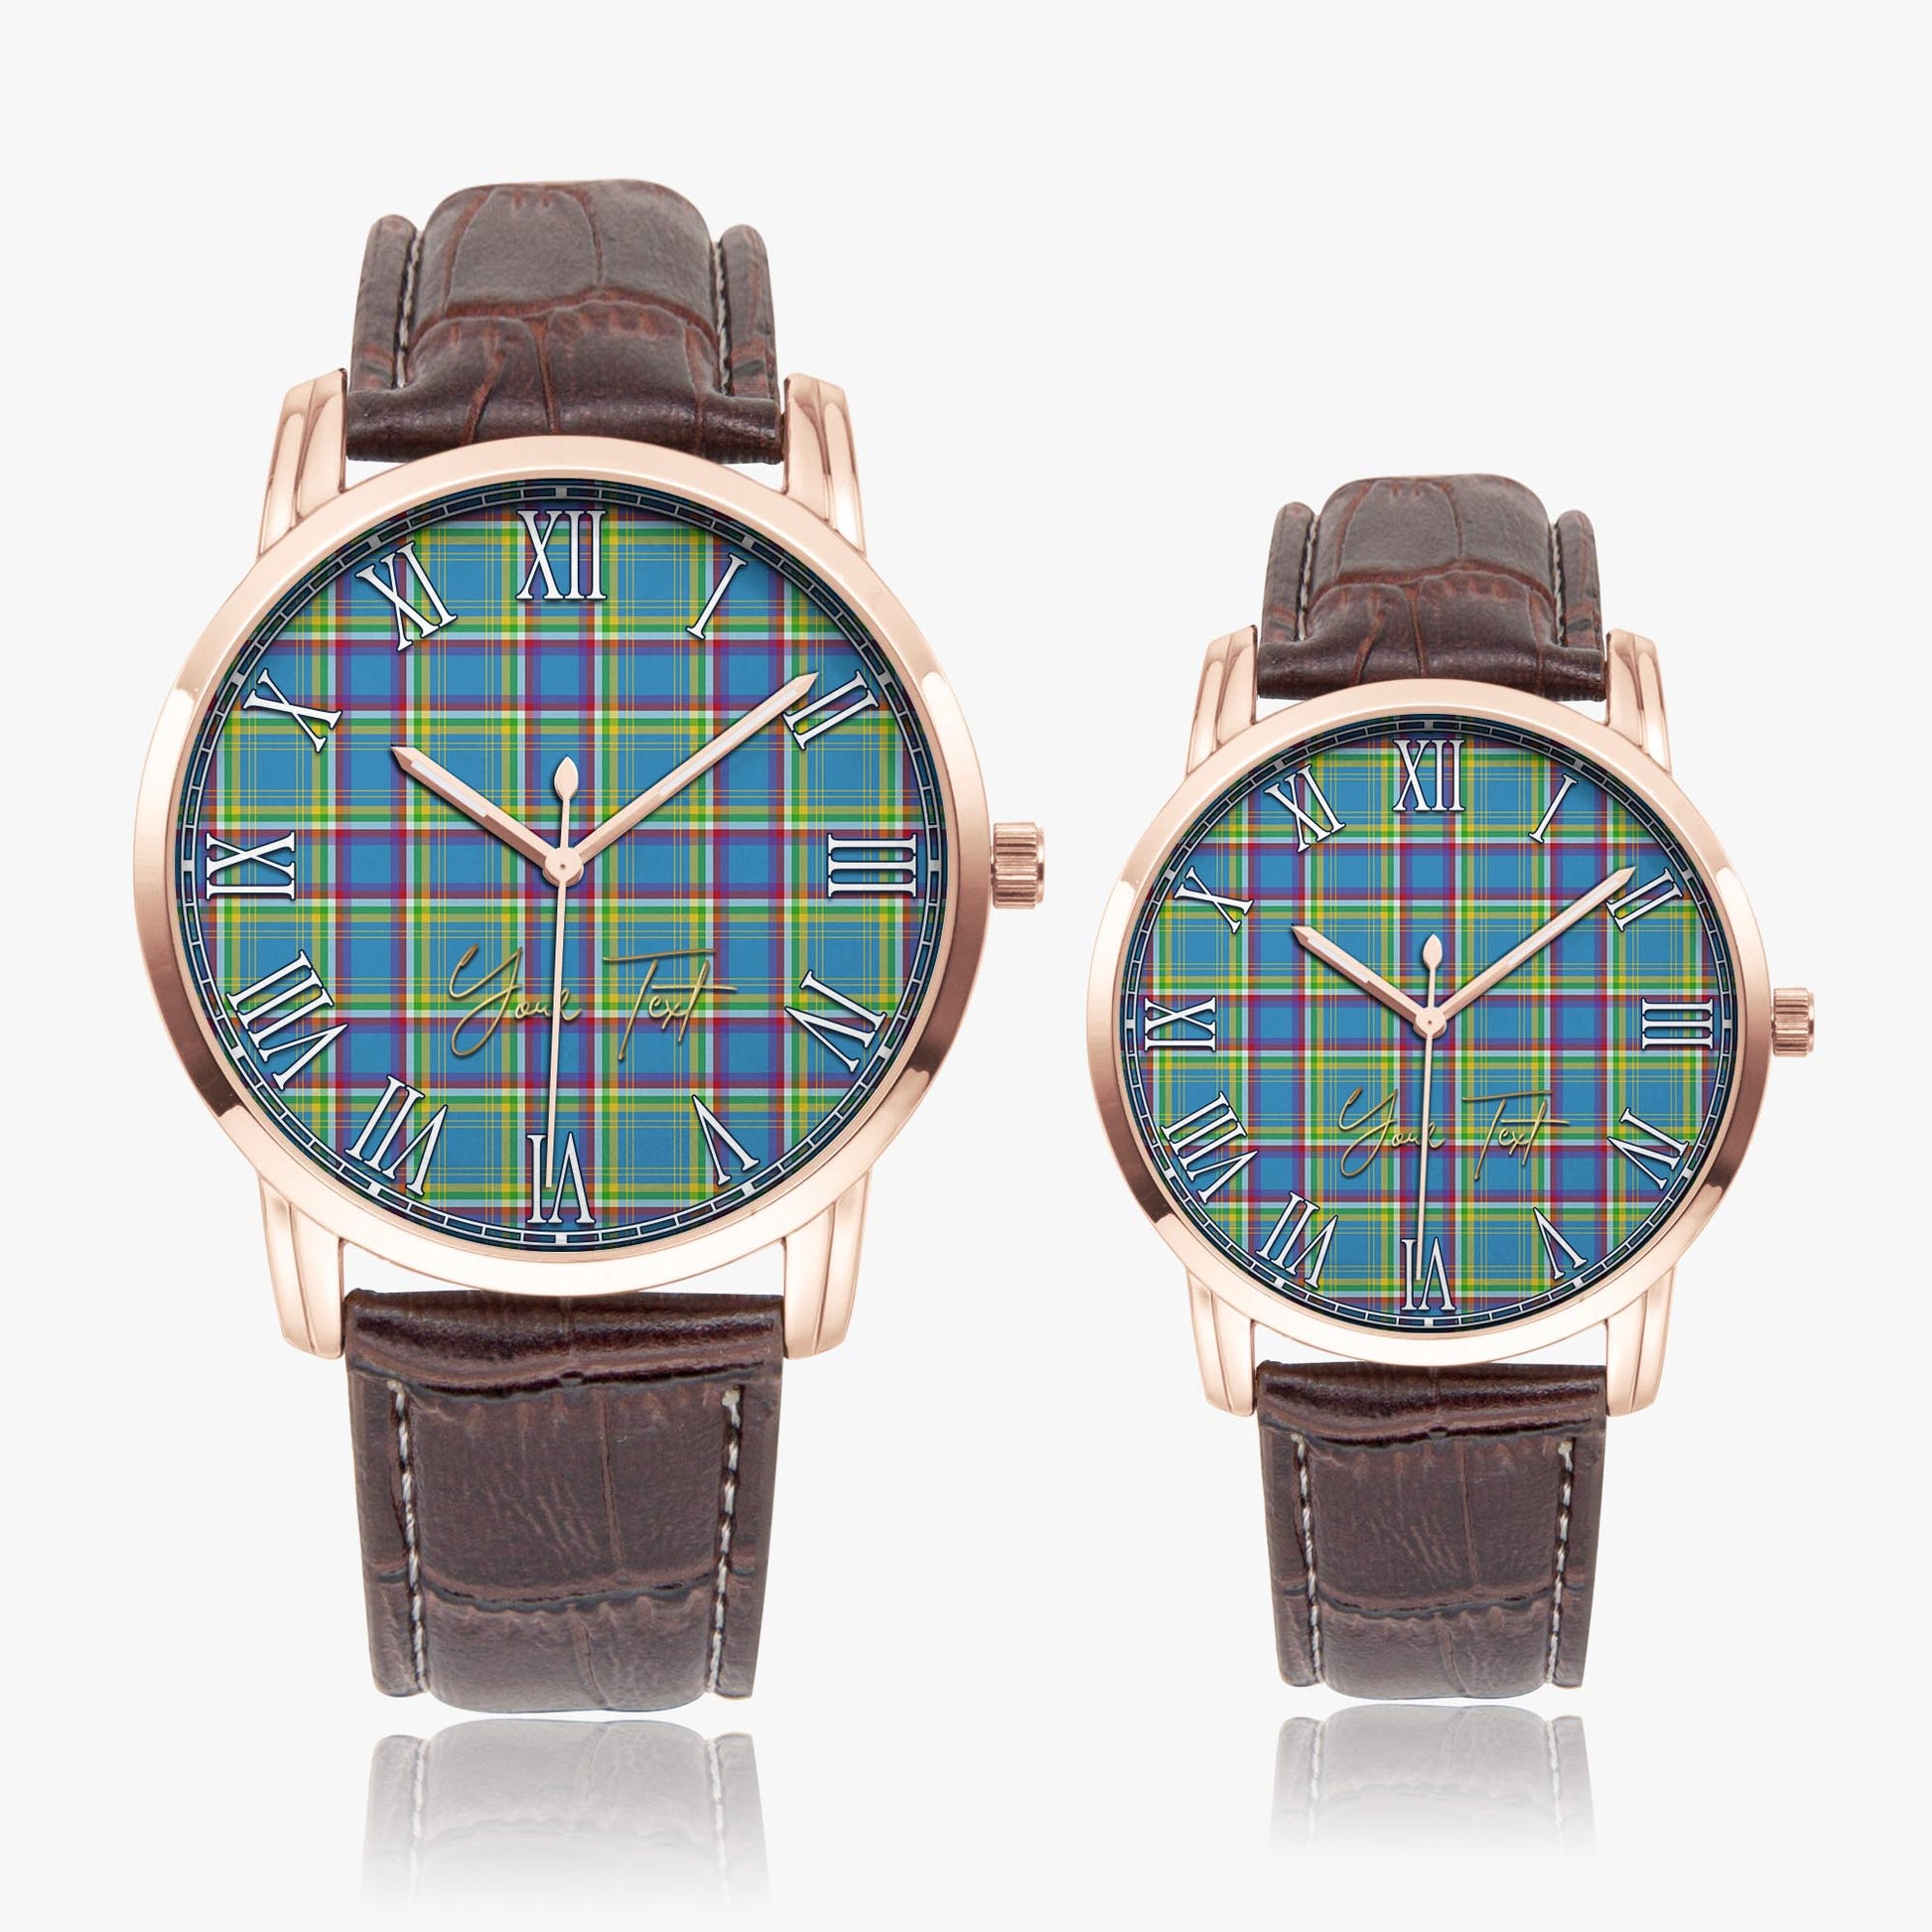 Yukon Territory Canada Tartan Personalized Your Text Leather Trap Quartz Watch Wide Type Rose Gold Case With Brown Leather Strap - Tartanvibesclothing Shop